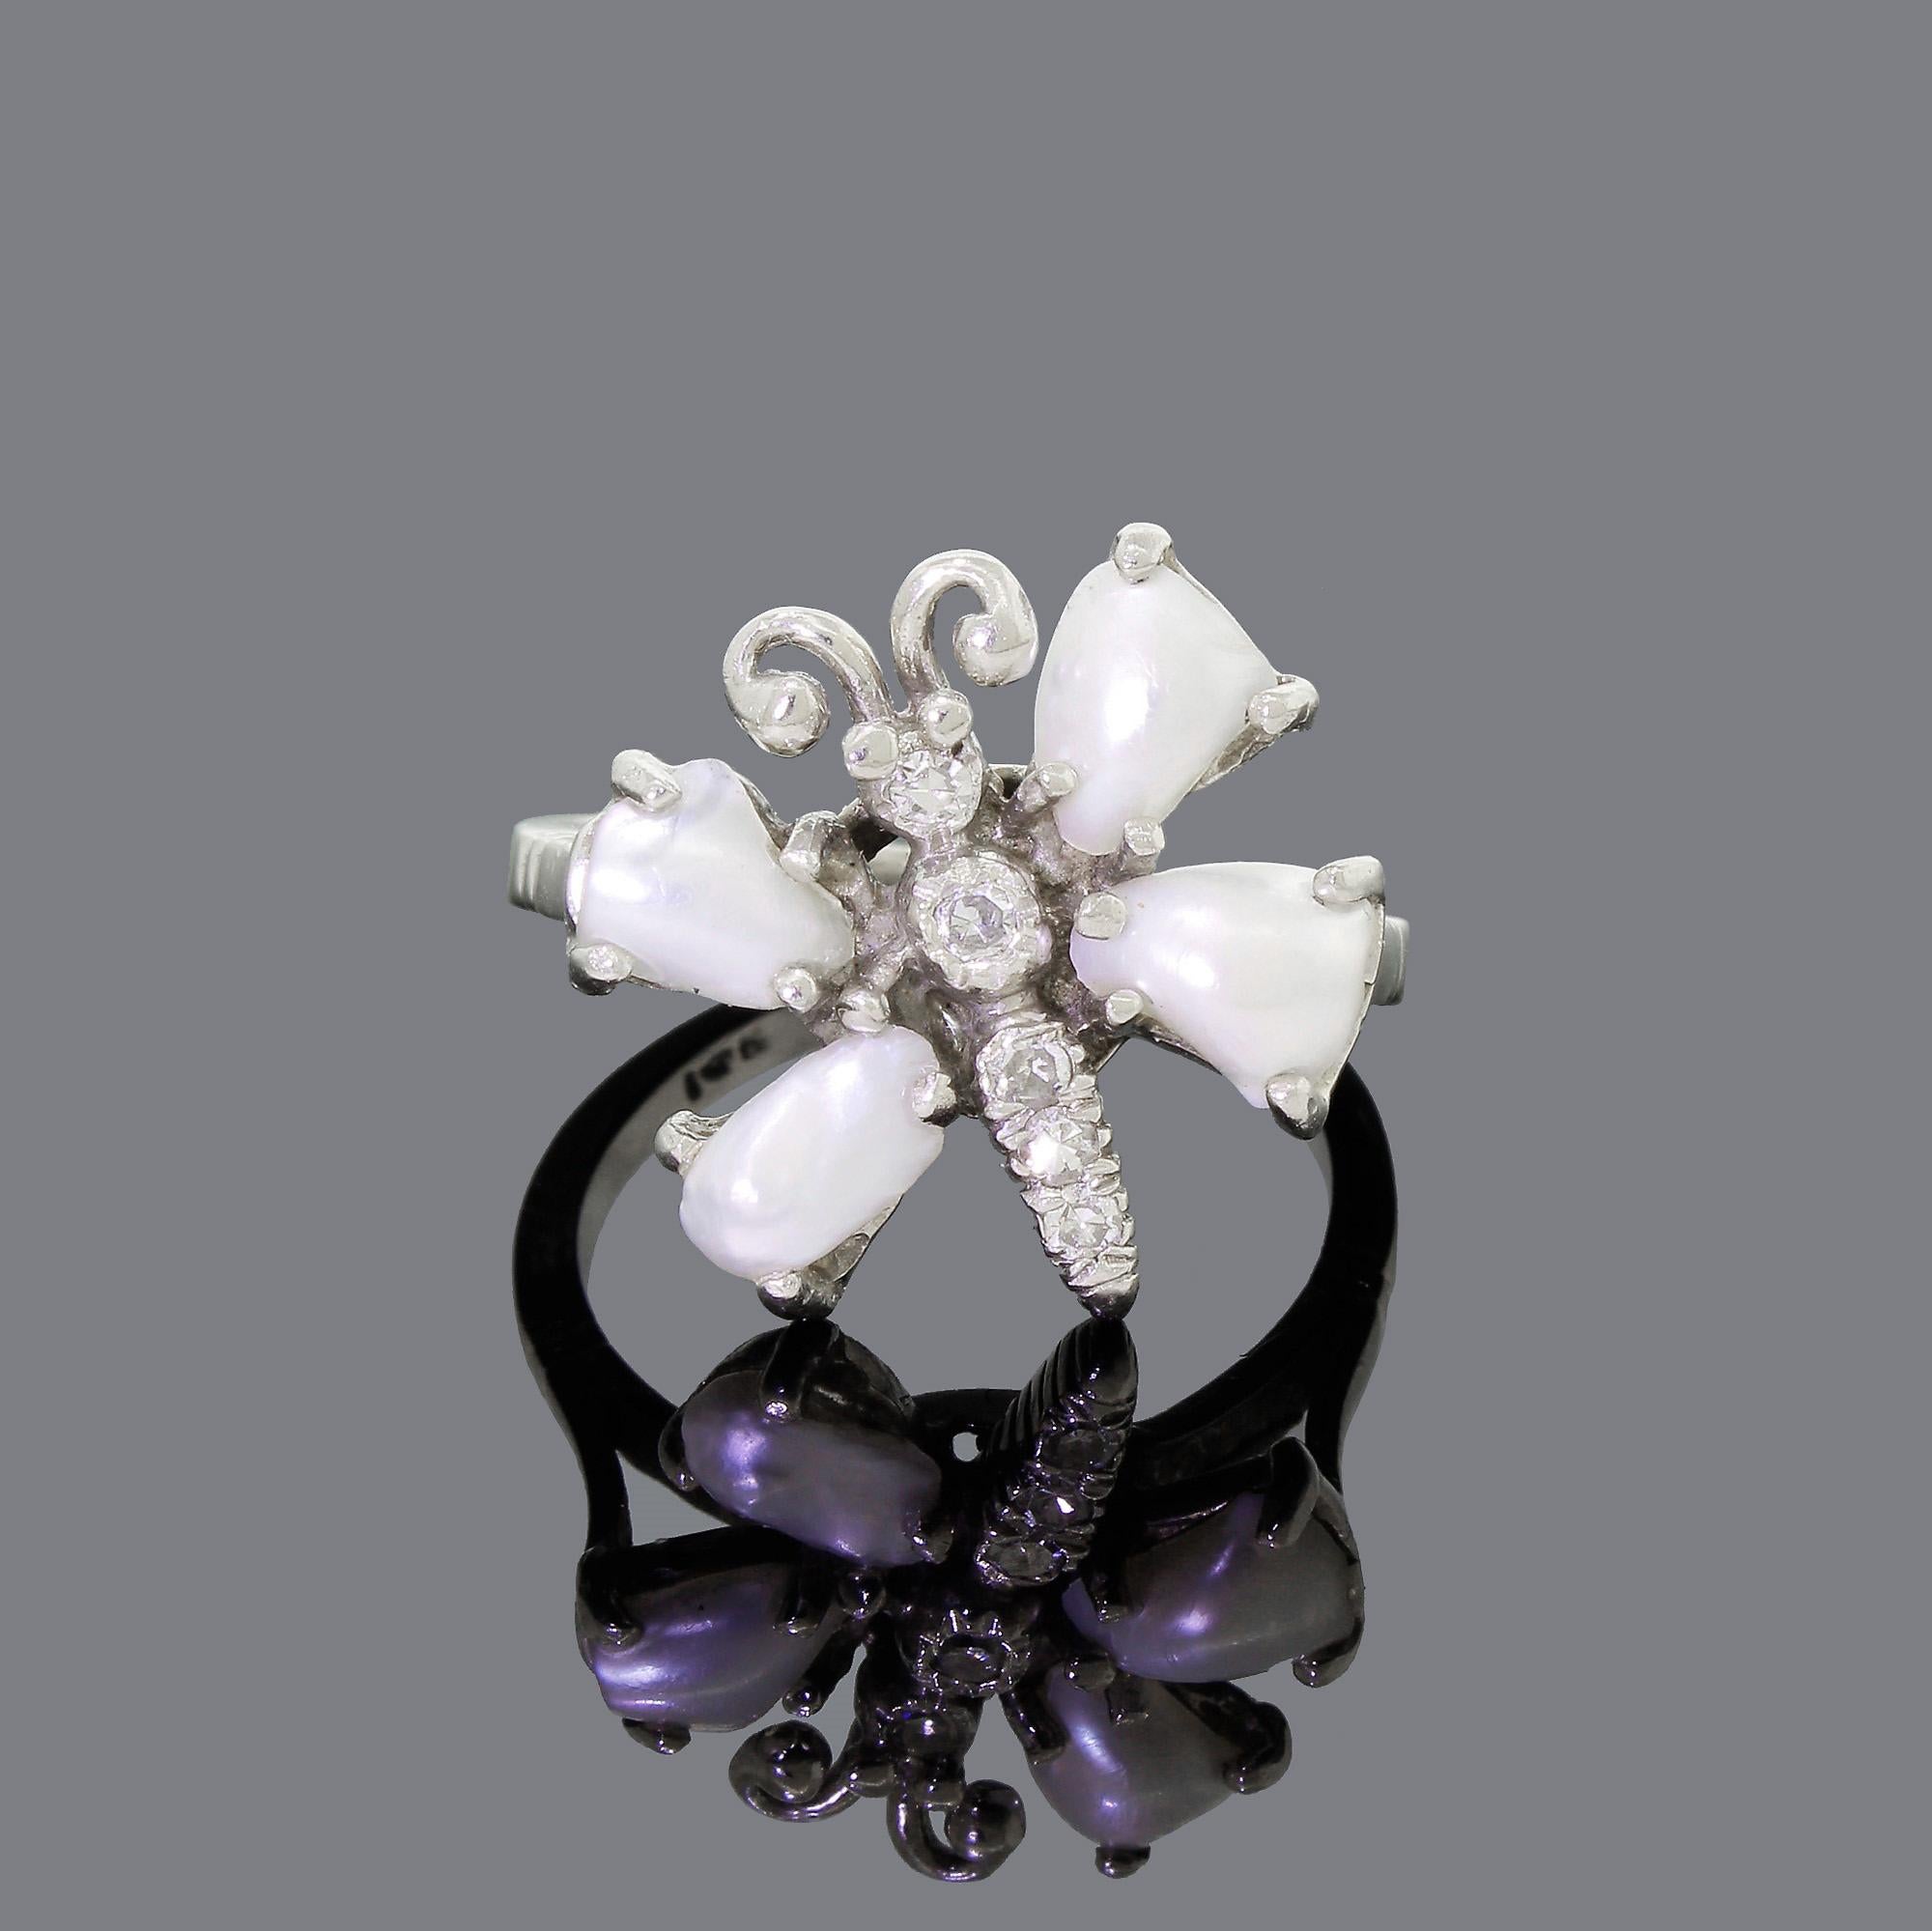 This lovely estate-found ring is incredibly elegant in person. The ring maintains a classy aesthetic while showing off the fun side to your nature.
The pictures simply do not do it justice. Set at a slight angle, the butterfly looks like it is just